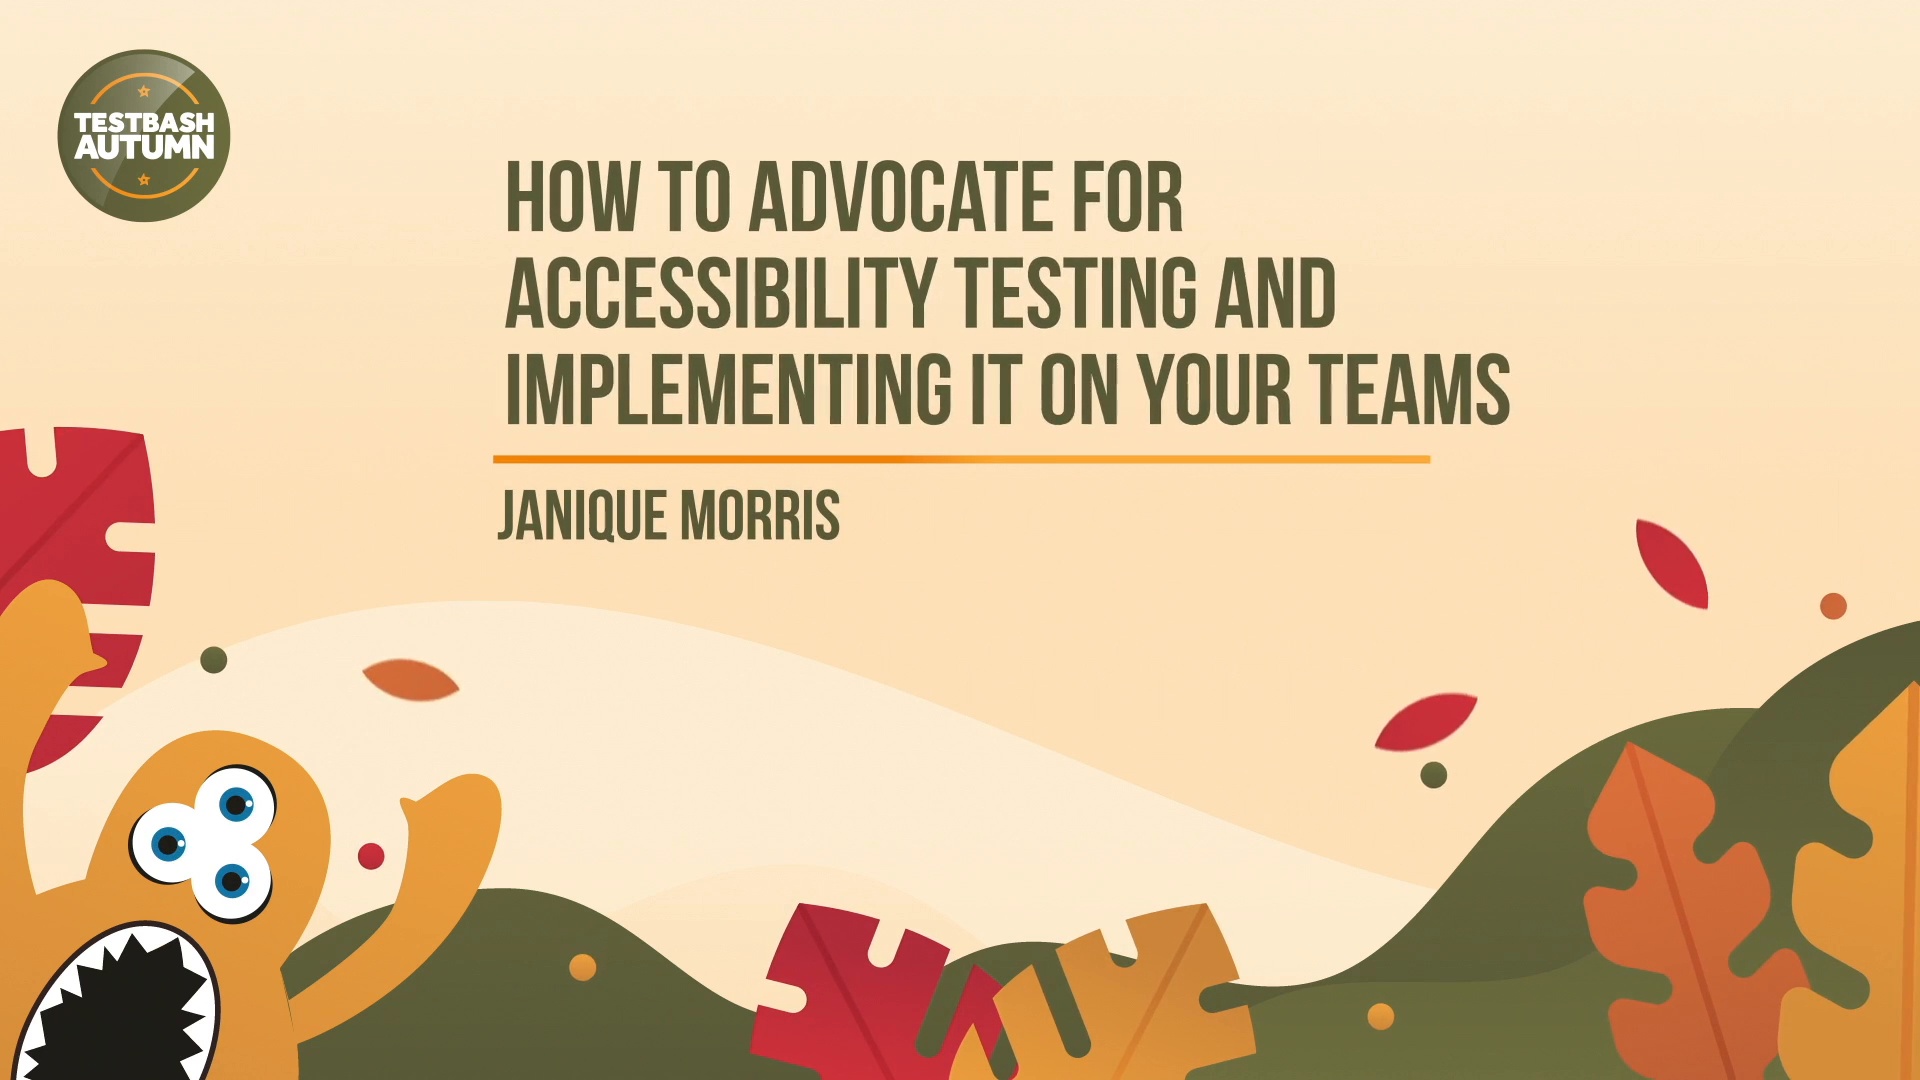 How to Advocate for Accessibility Testing and Implementing It on Your Teams